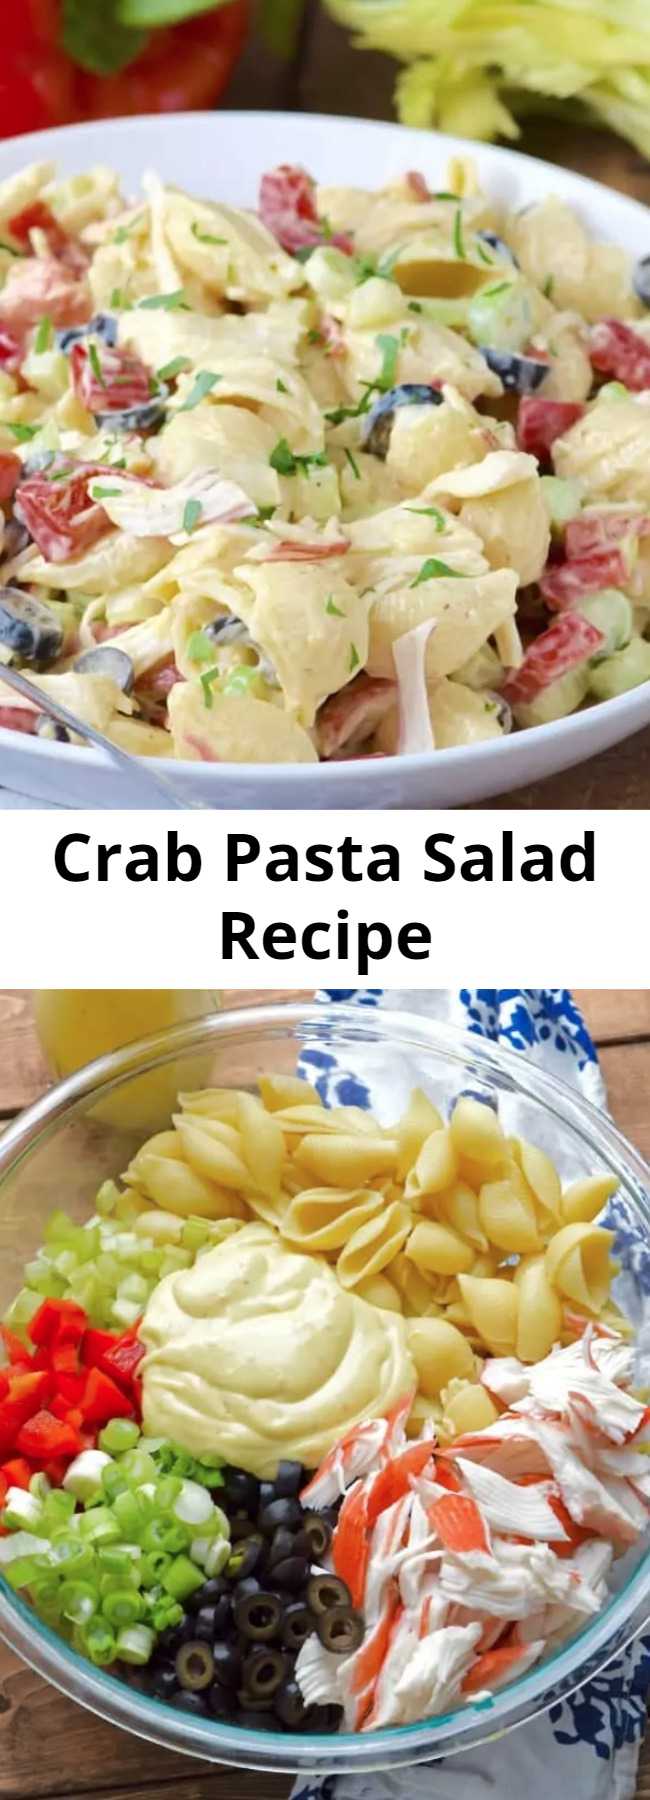 Crab Pasta Salad Recipe - This Crab Pasta Salad is a family recipe, one of my favorites! Packed with veggies and delicious flavor, it’s a staple at summer BBQs! This crab pasta salad is made with Italian dressing and either Spike or Old Bay Seasoning.